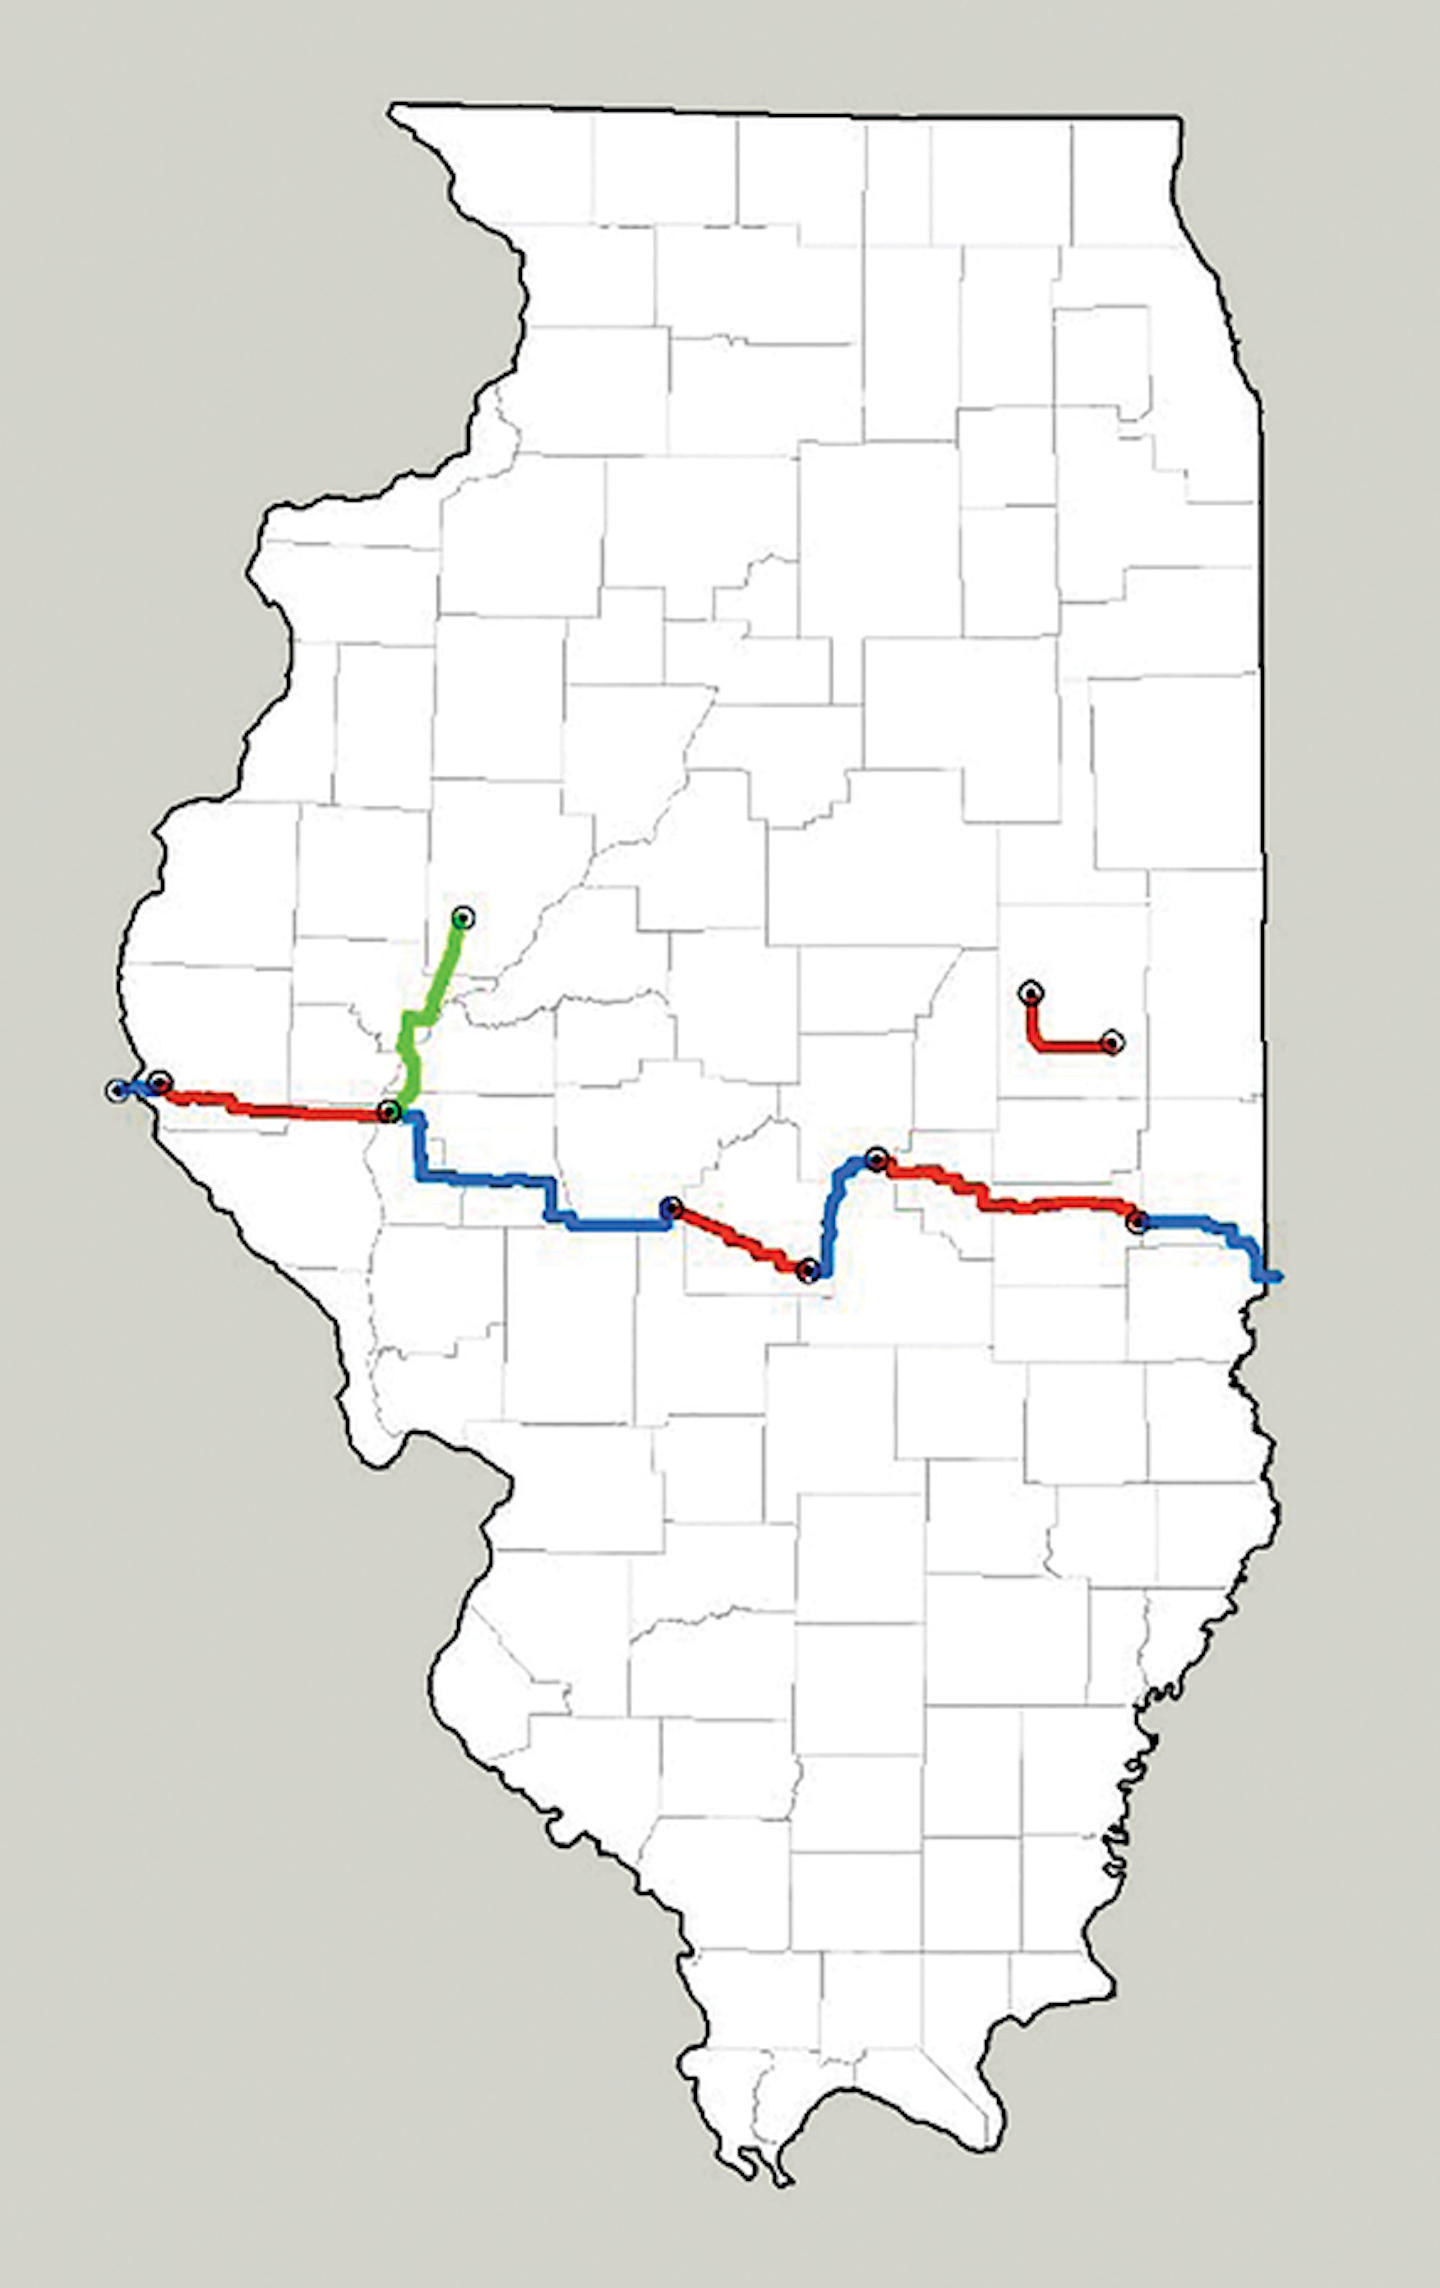 Ameren Illinois Rivers Project Map Boring Data: Exciting Impact For Transmission Lines | T&D World